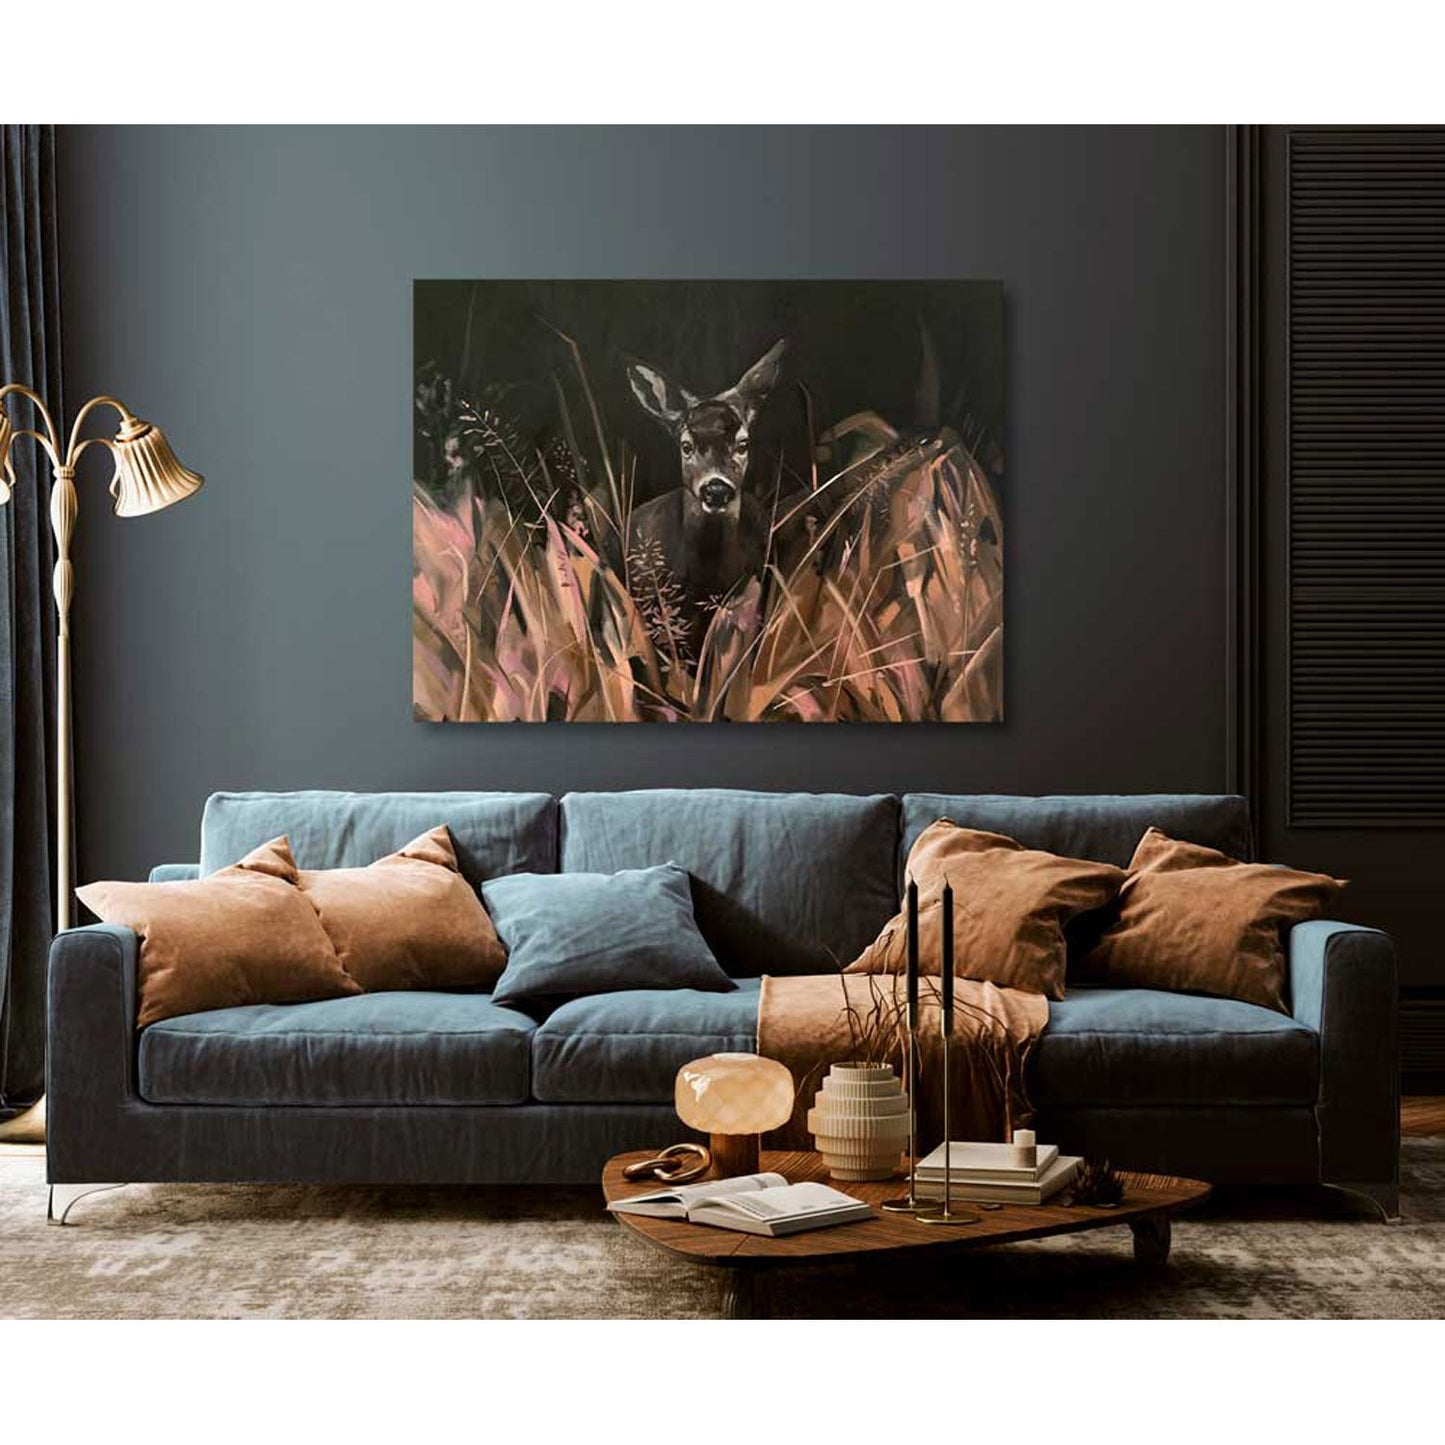 Woodland Life - Doe In The Woods Canvas Wall Art